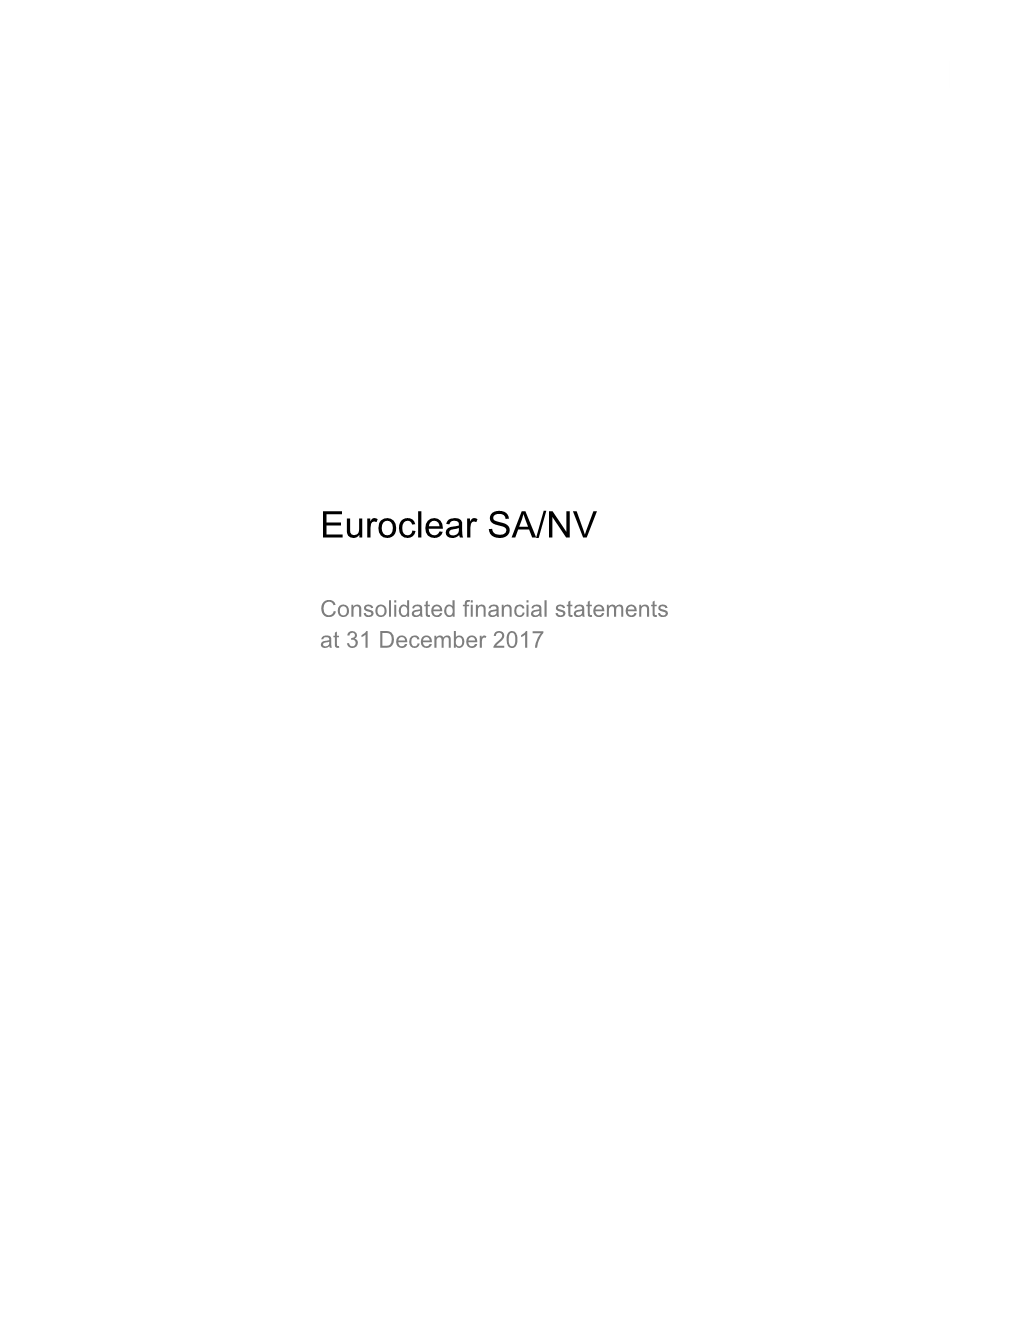 Euroclear SA/NV Consolidated Financial Statements 2017